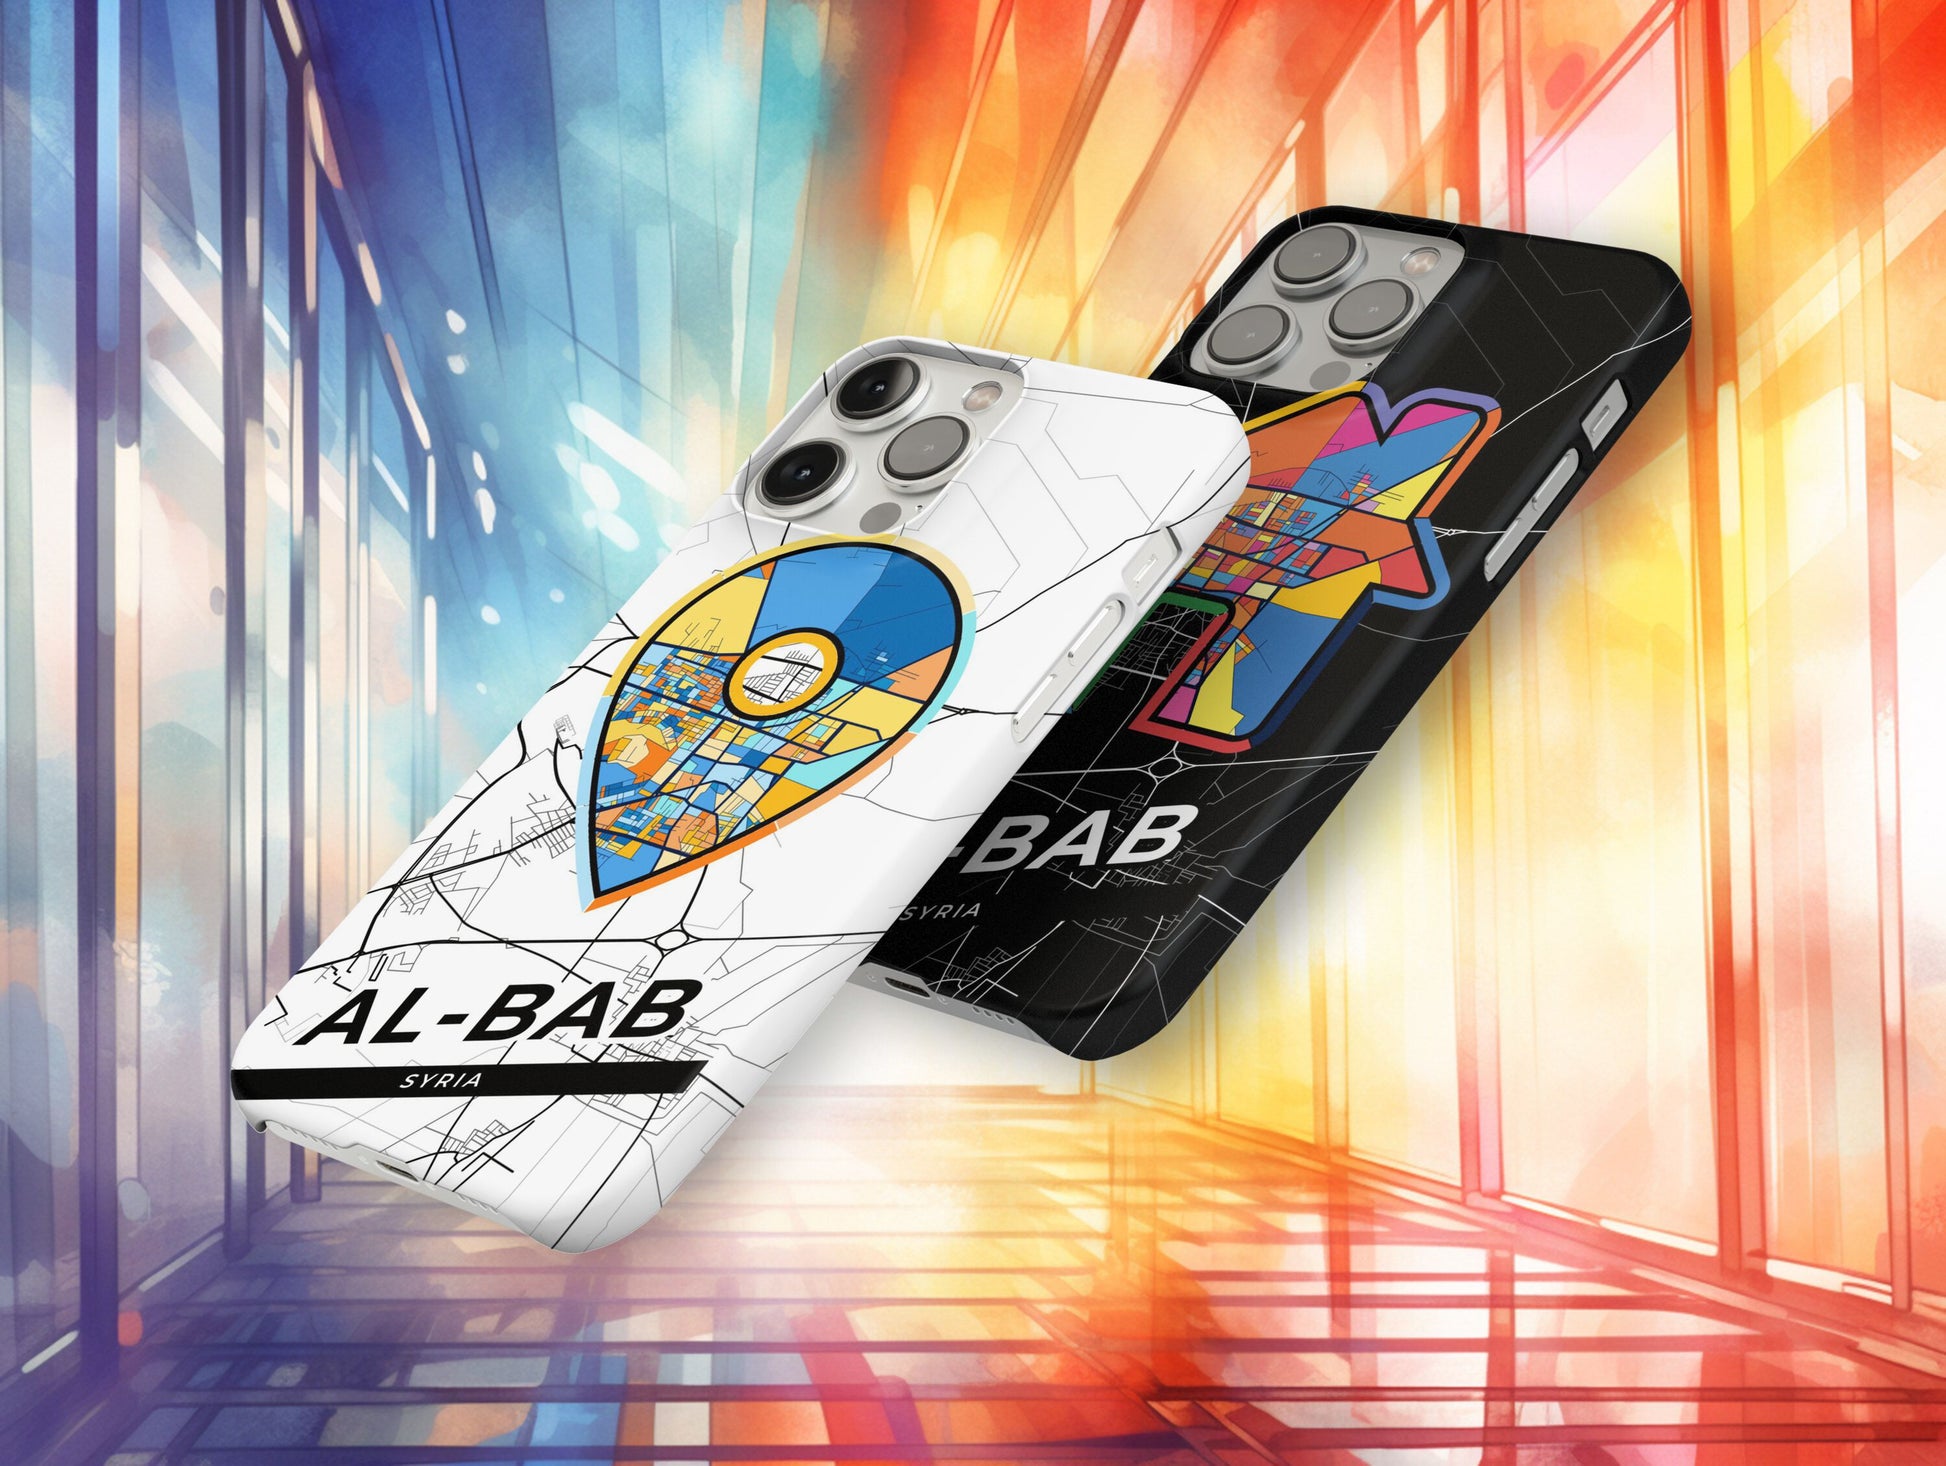 Al-Bab Syria slim phone case with colorful icon. Birthday, wedding or housewarming gift. Couple match cases.